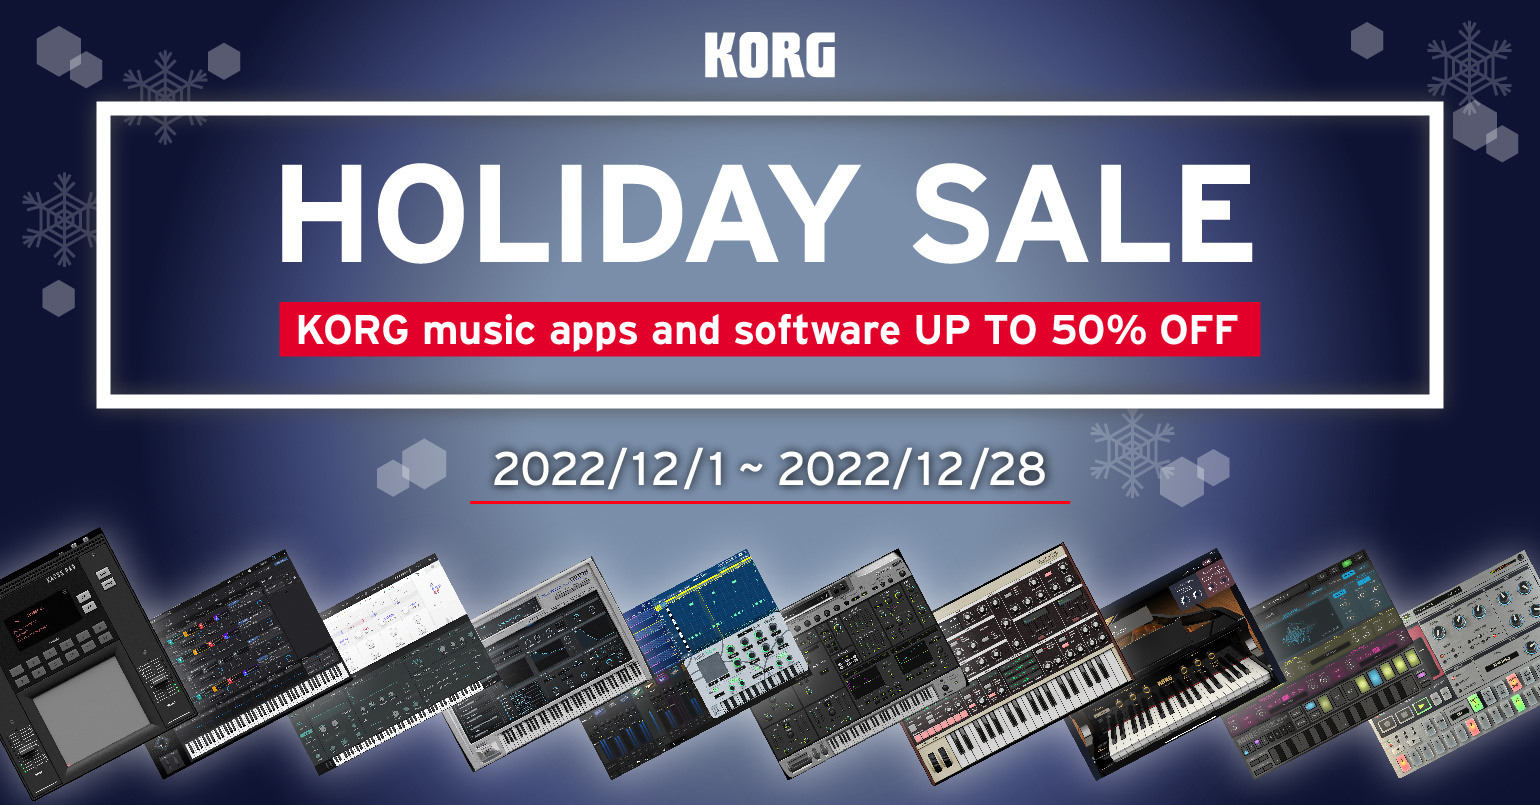 News | Holiday Sale: KORG music apps & software up to 50% OFF Sale